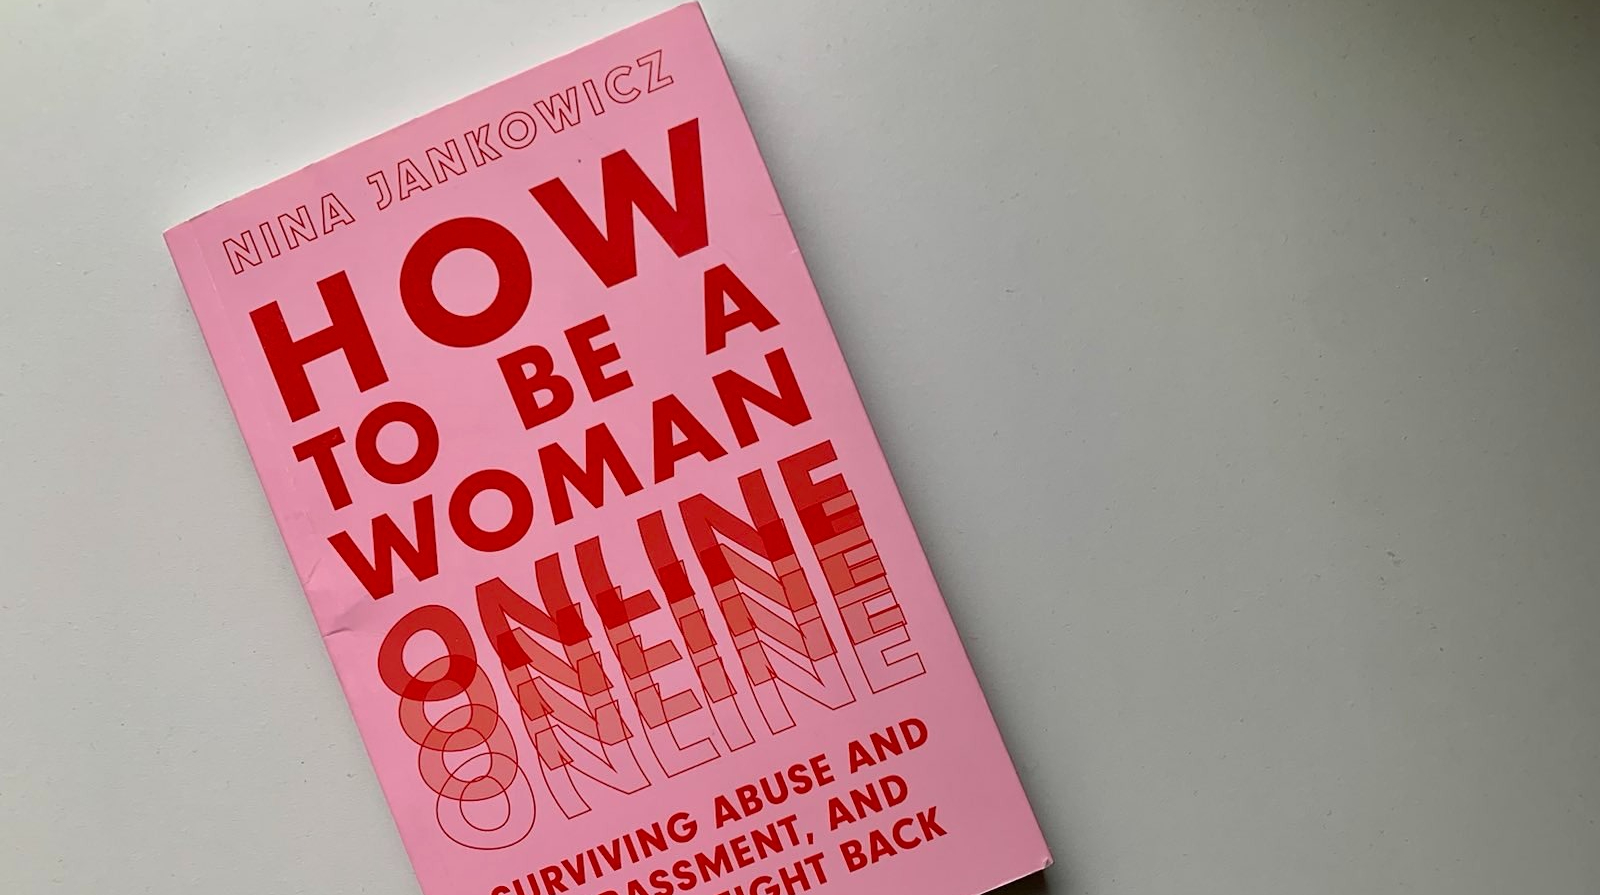 How women can protect themselves from online threats: tips